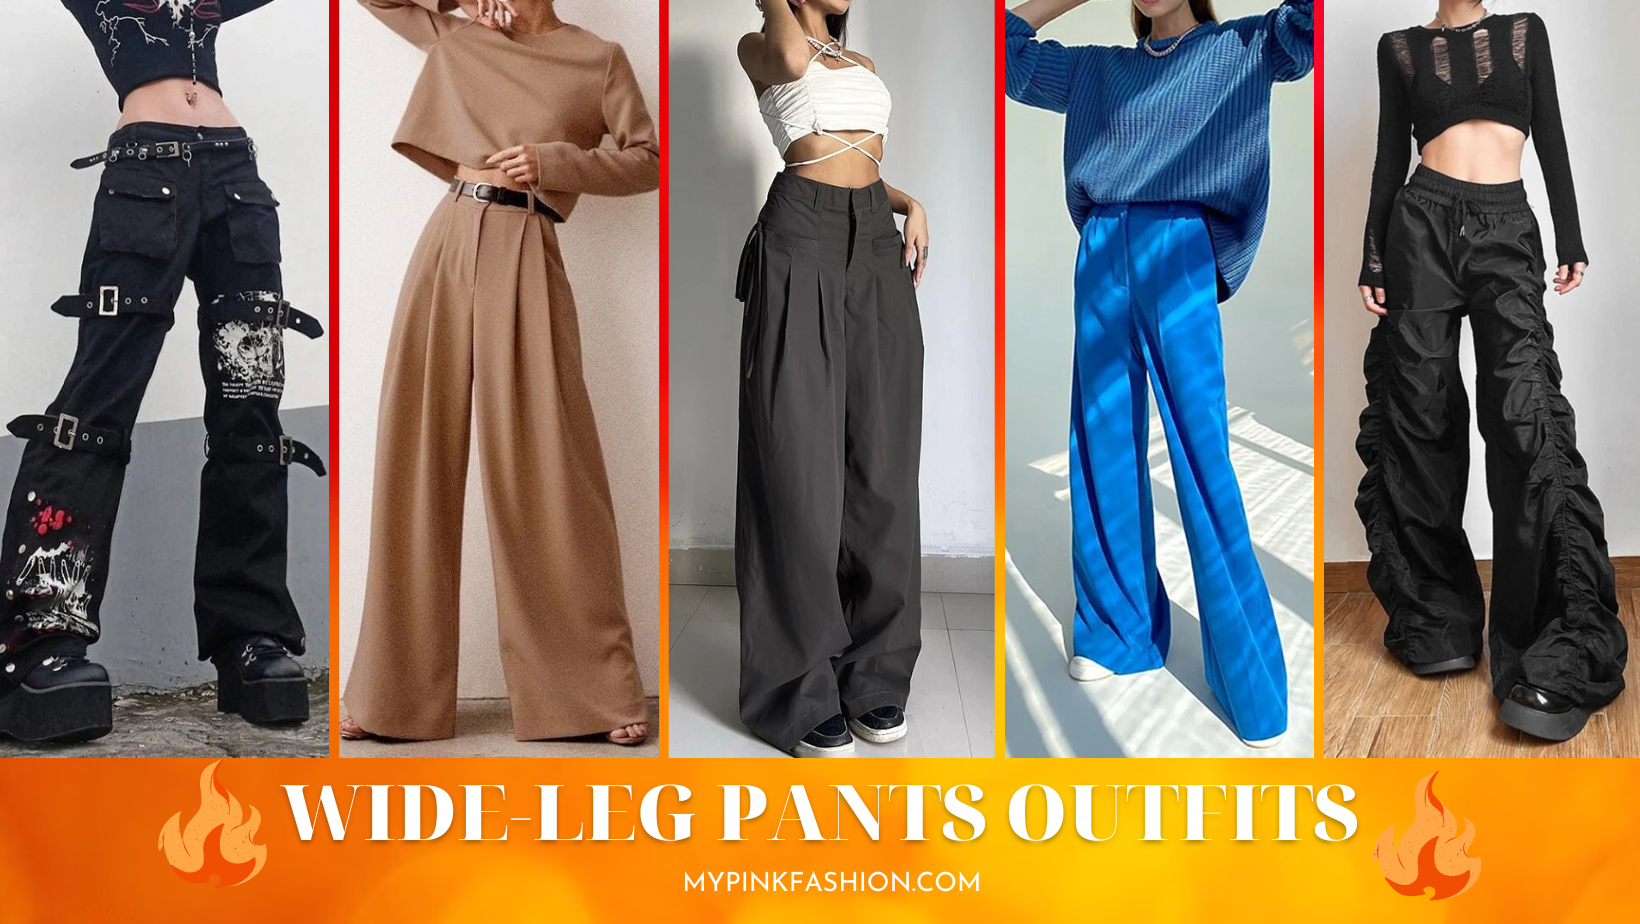 Wide-Leg Pants: The Ultimate In Comfort And Style